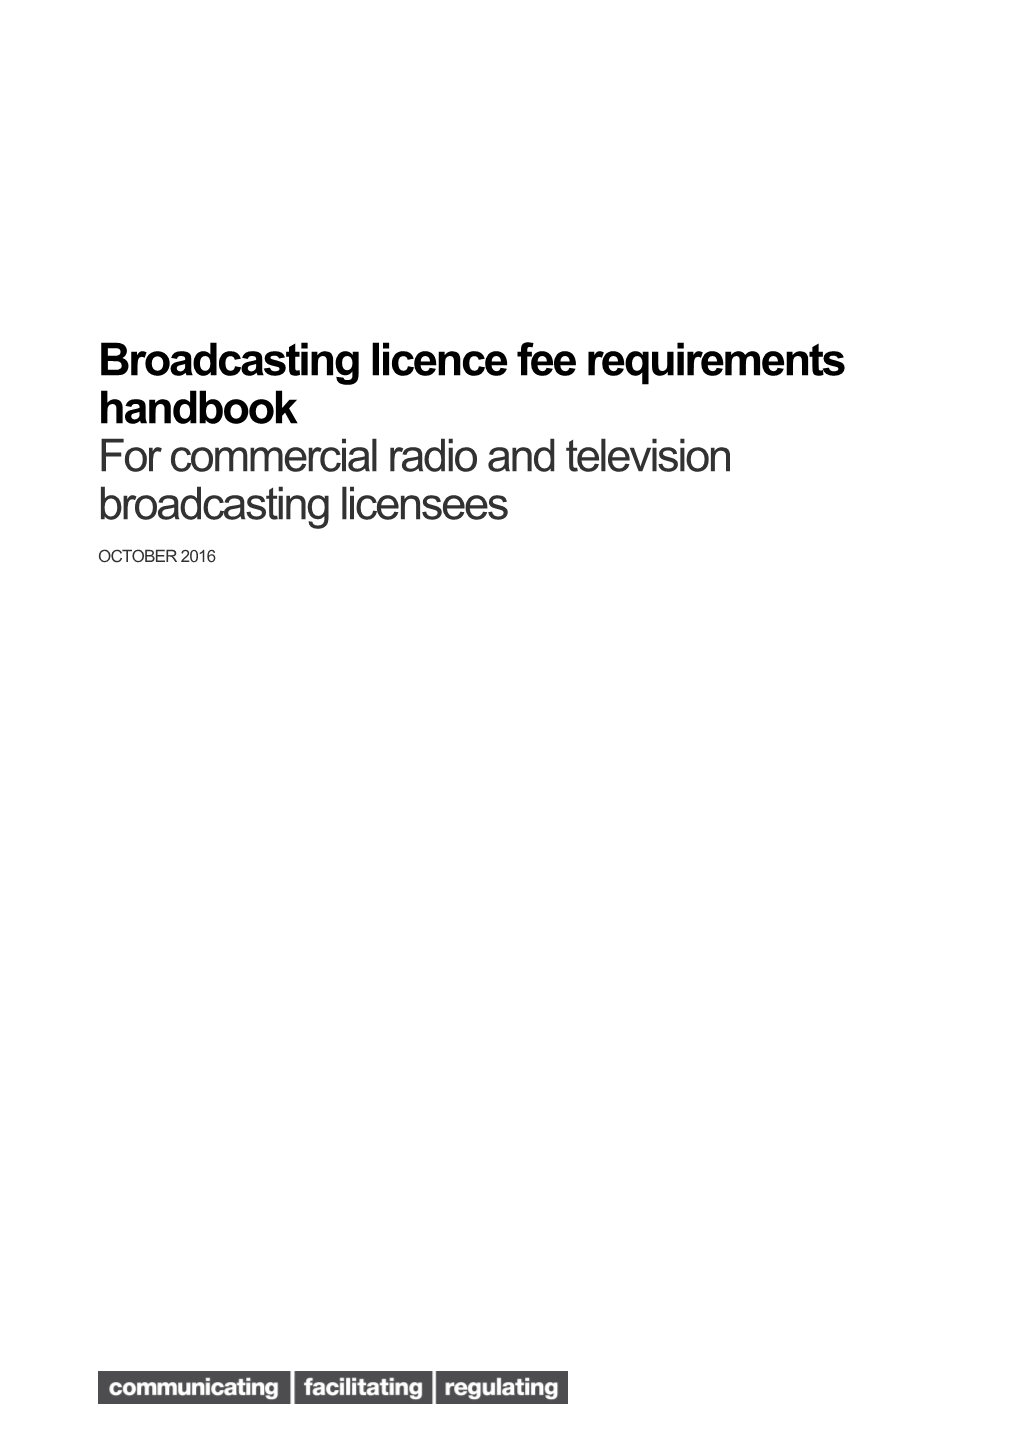 Broadcasting Licence Fee Requirements Handbook